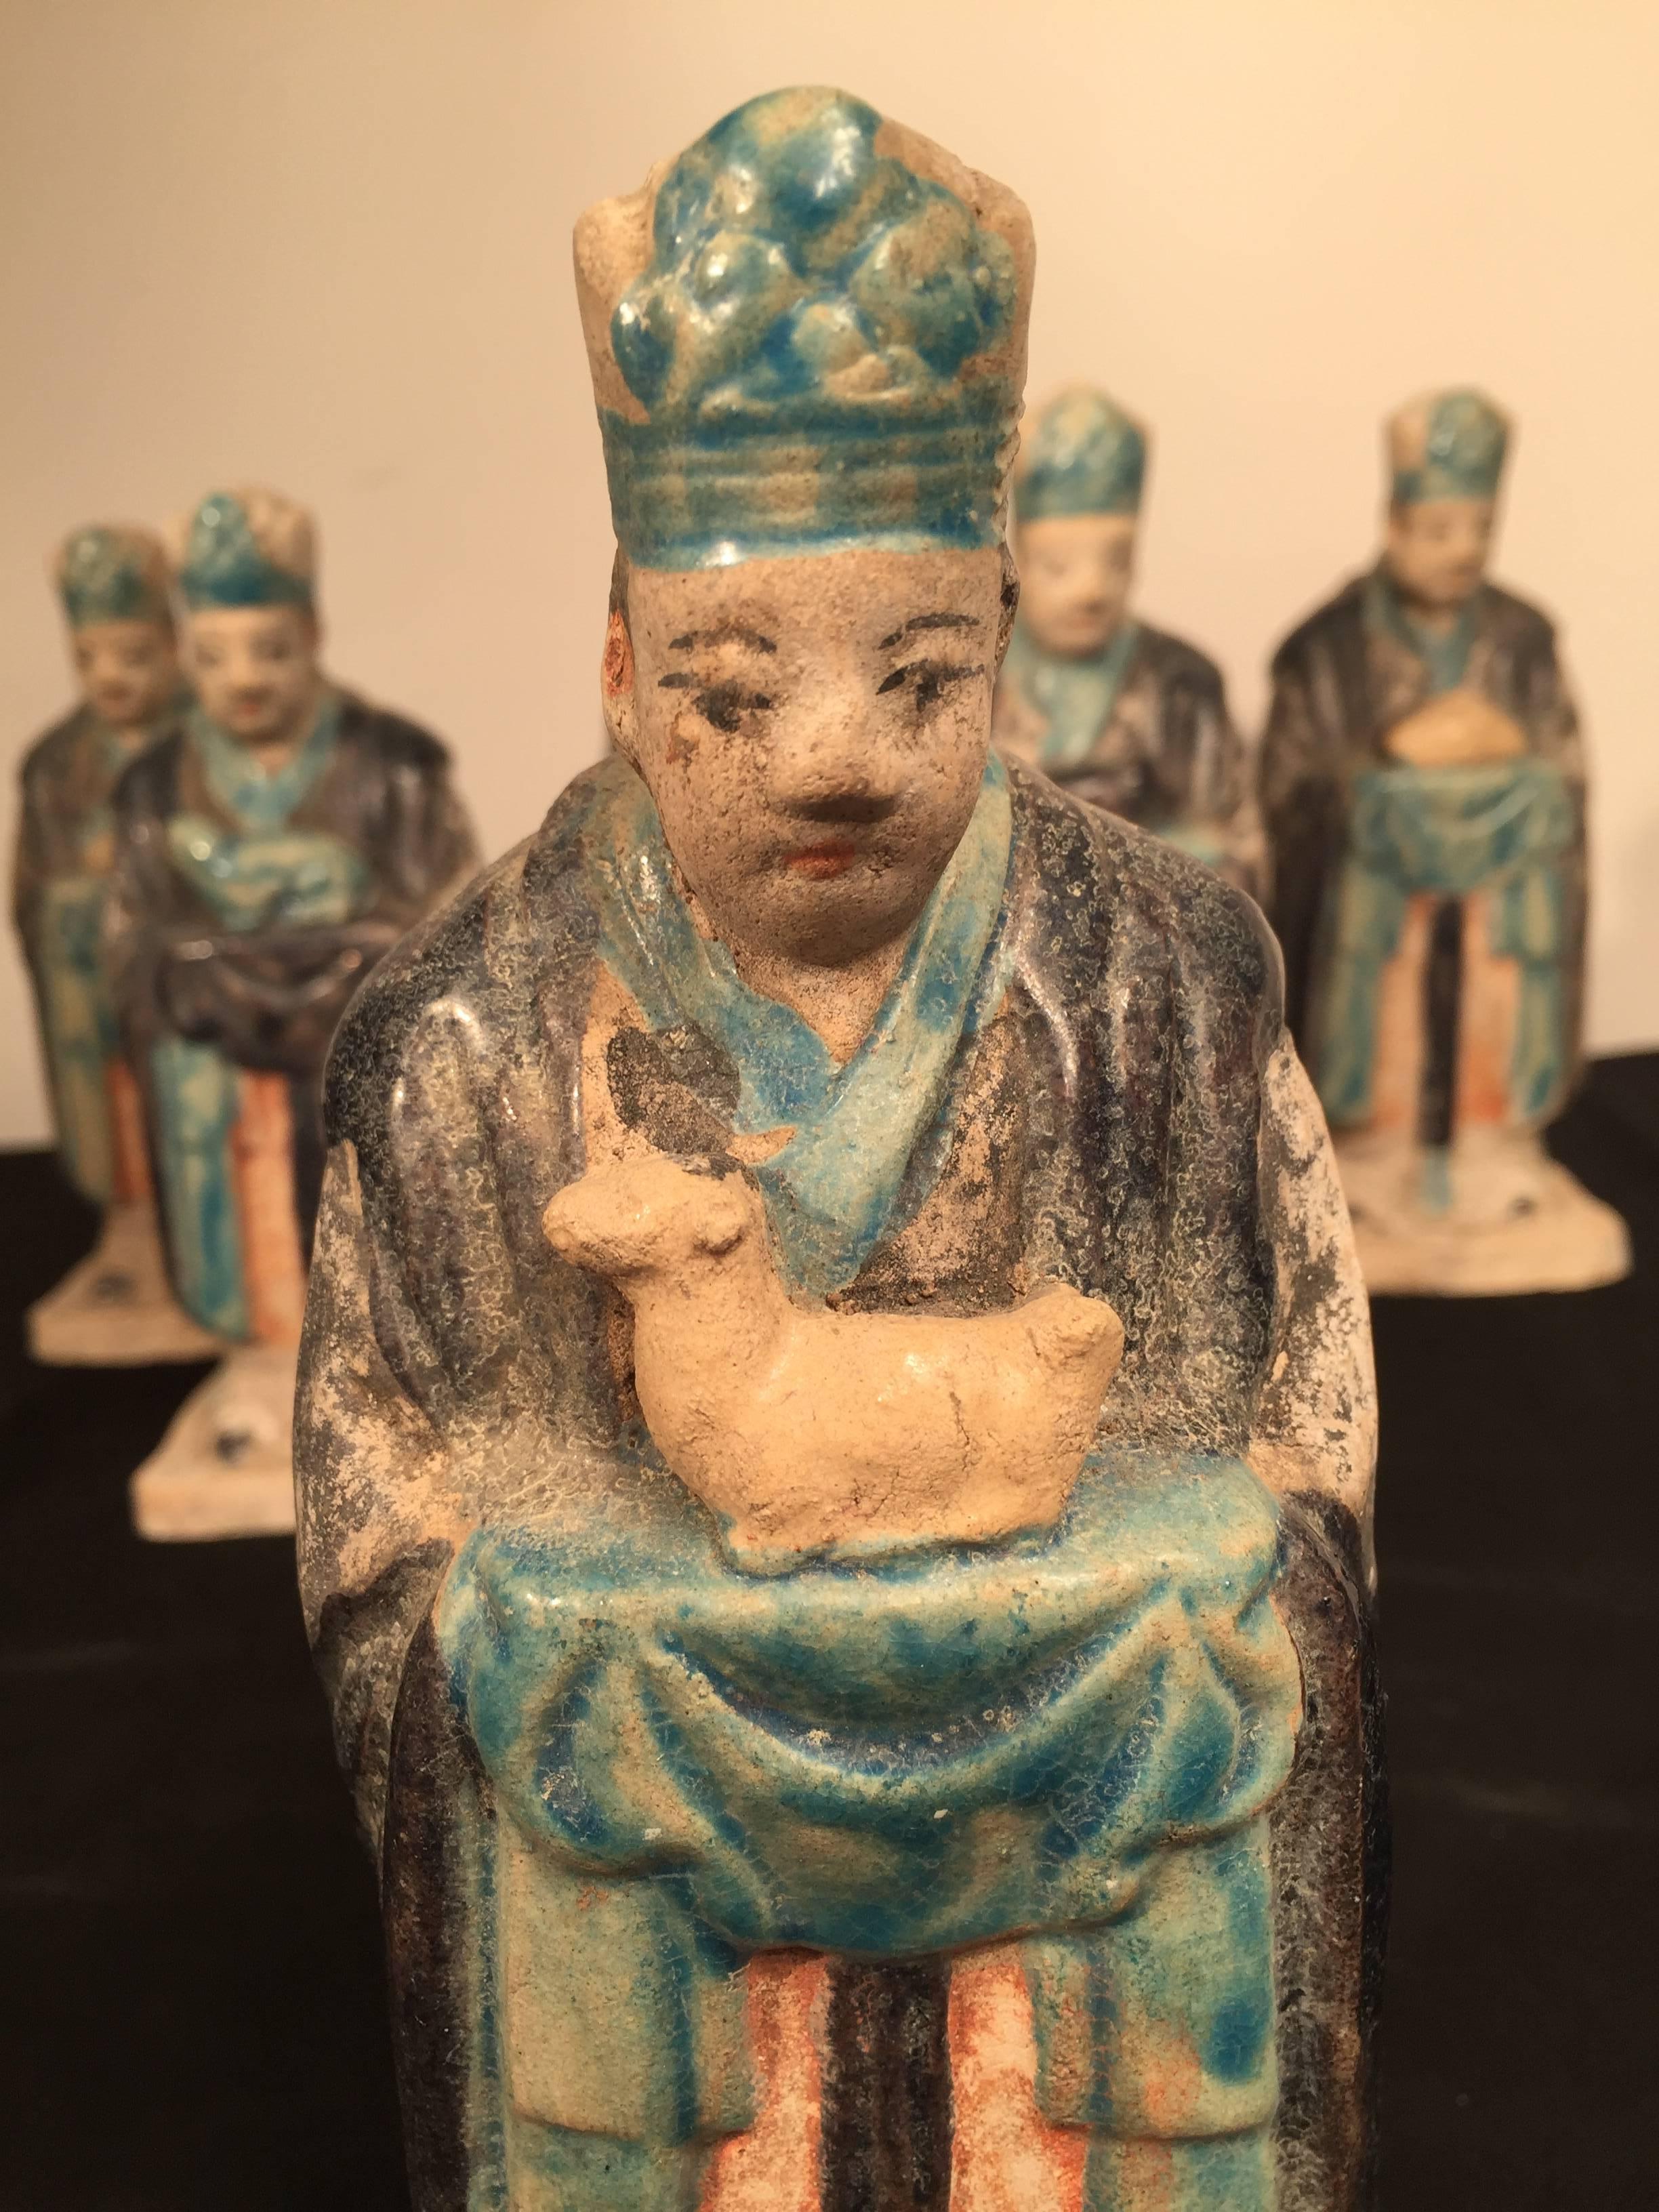 Important Ancient Chinese Zodiac figure holding a DOG, Ming Dynasty, 1368-1644

This interesting zodiac figure is one in a series of twelve (12) tomb figures each brandishing a different animal from the zodiac. Look for other listings offering the